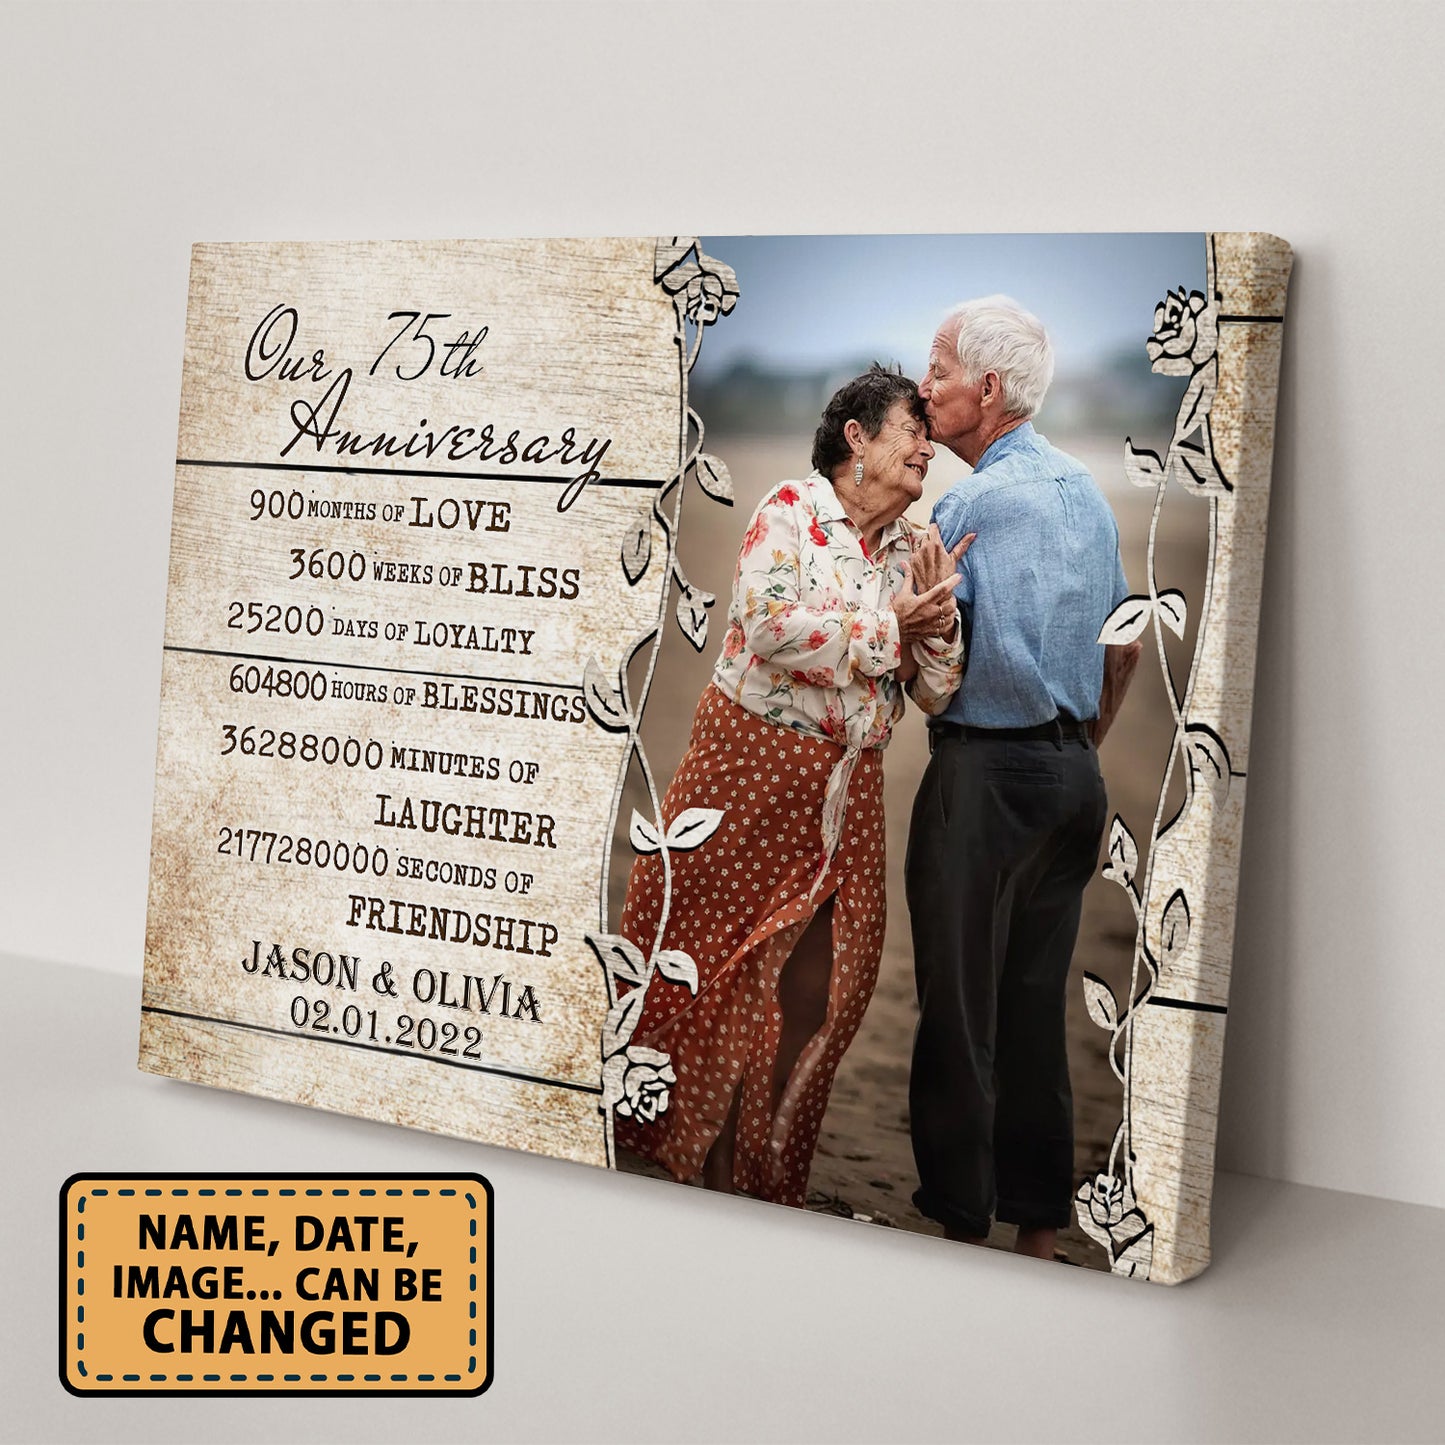 Our 75th Anniversary Timeless love Valentine Gift Personalized Canvas